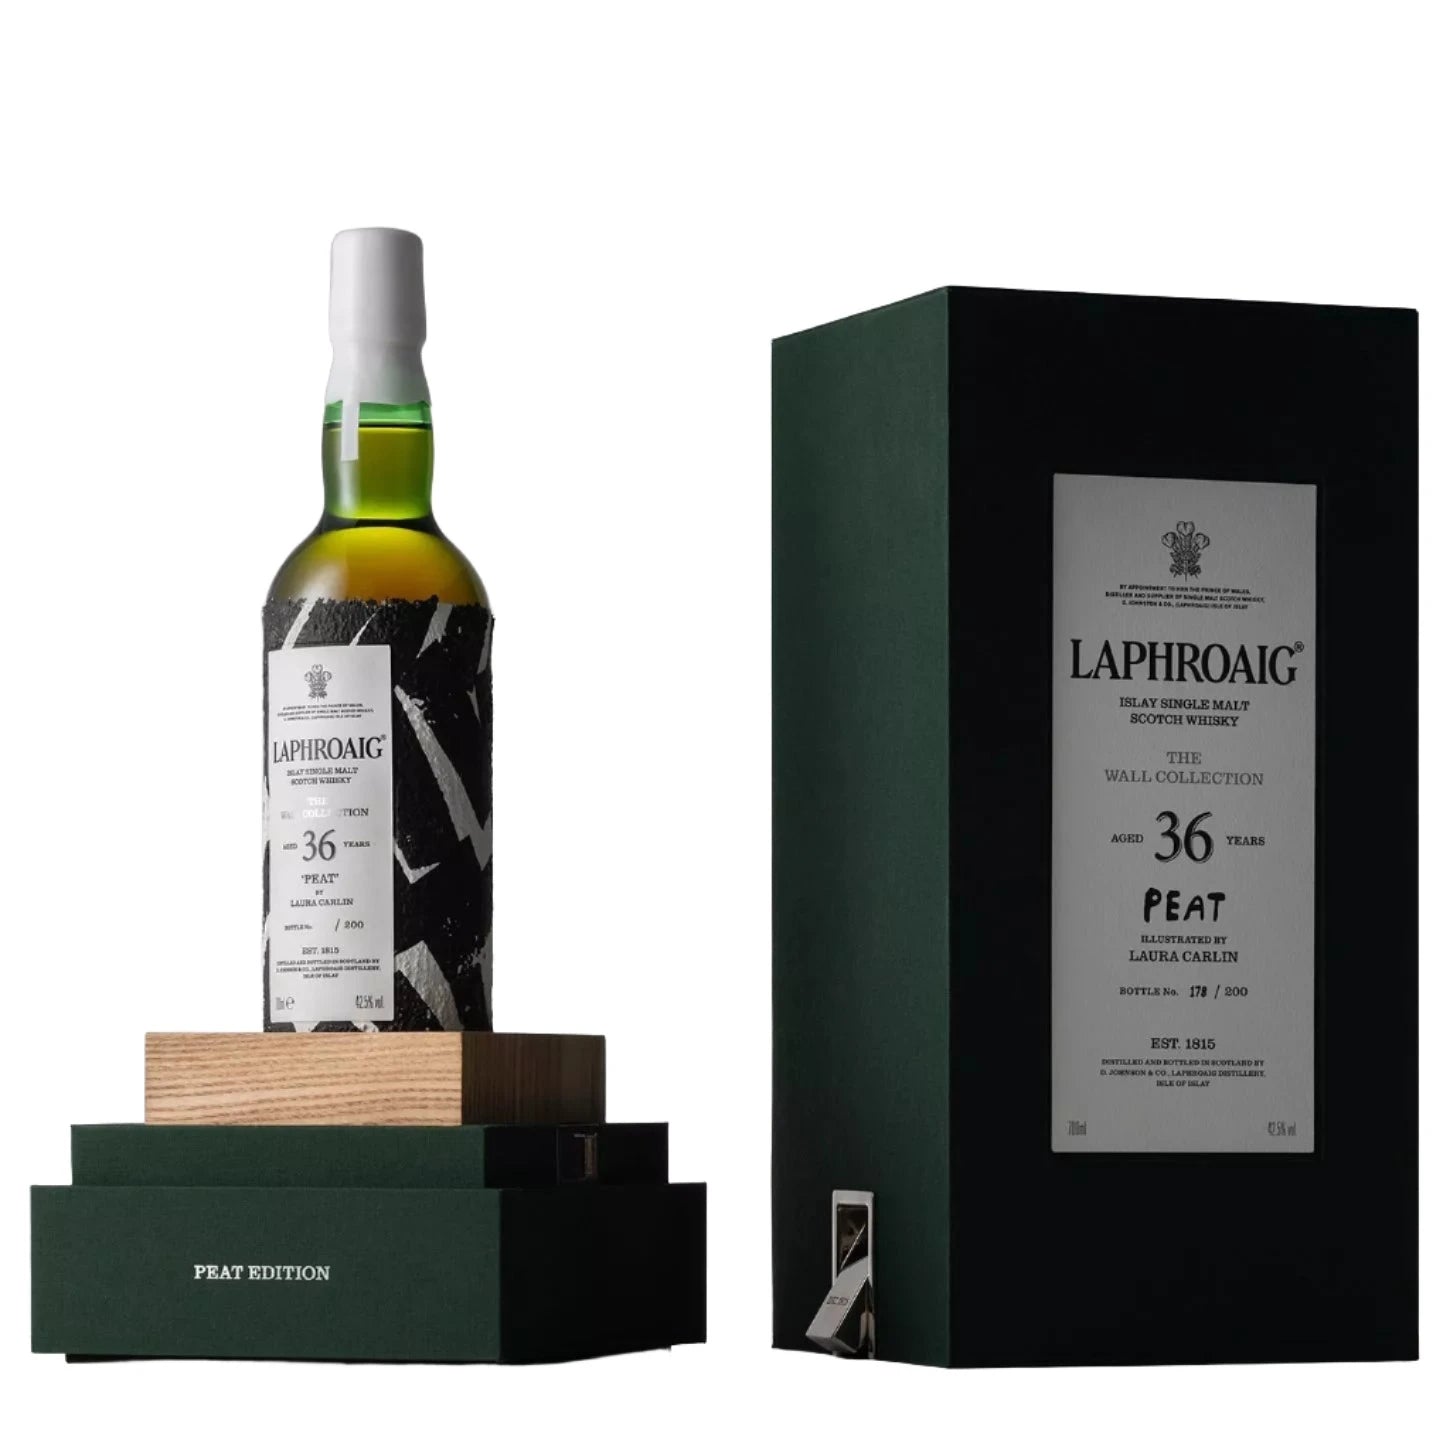 Laphroaig The Wall Collection Peat 36 year